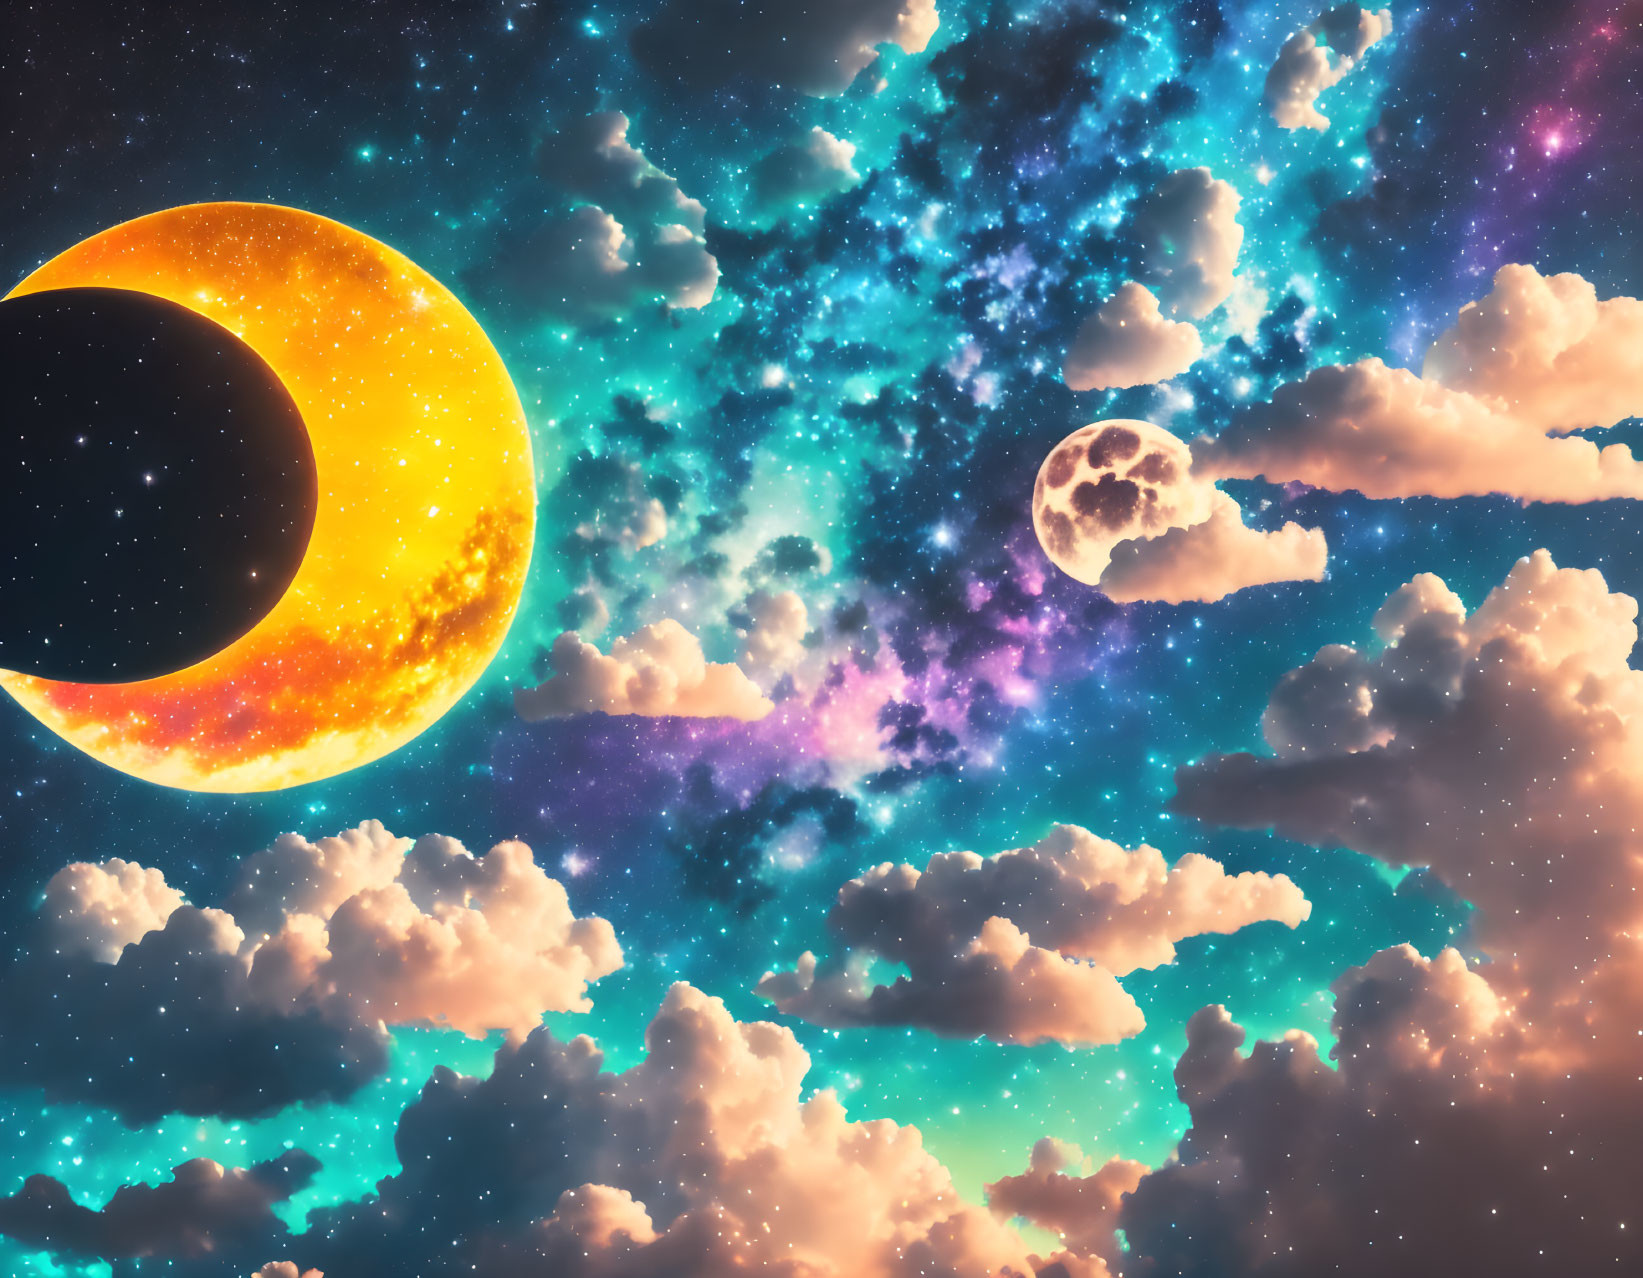 Colorful cosmic scene with crescent sun, full moon, and star-filled galaxy.